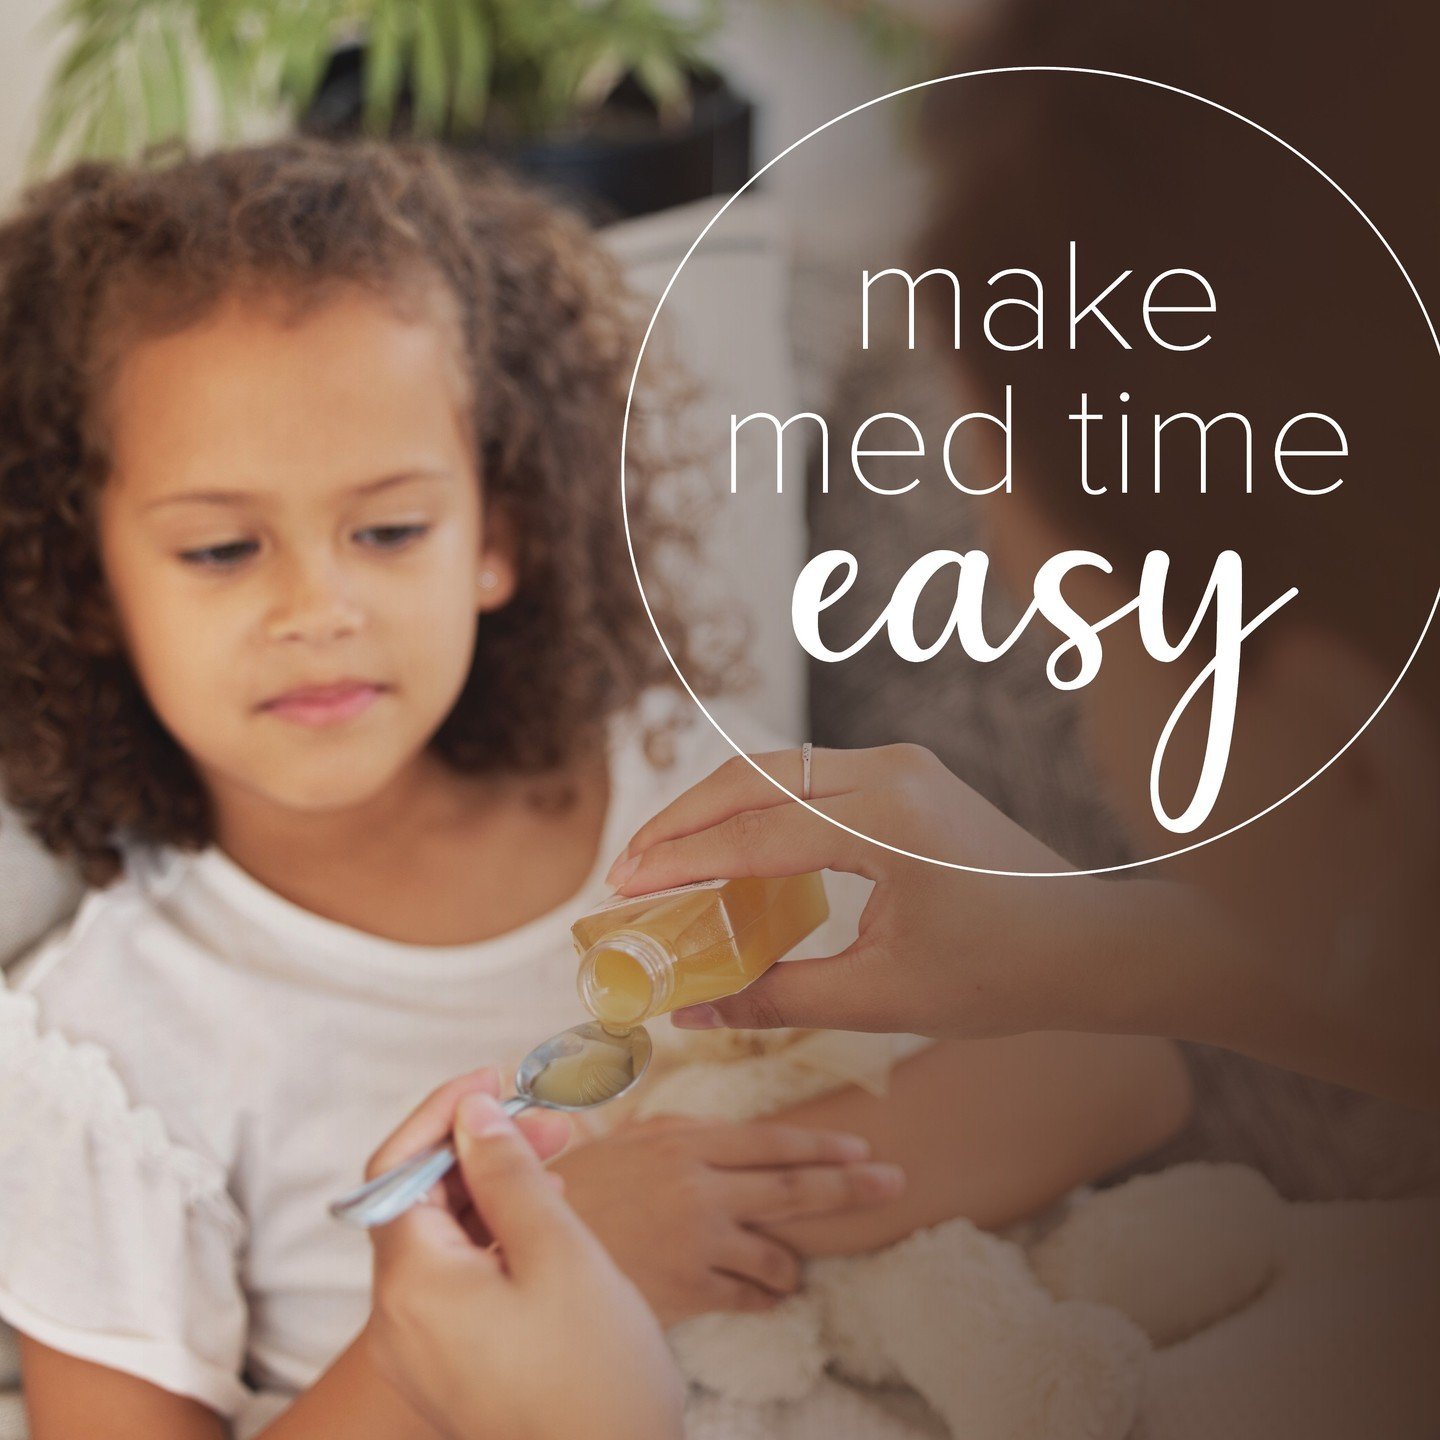 Medicine time can be a stressful task when it comes to the kiddos. We can make med time easy by customizing your kiddo's medication to an acceptable flavor, dosage form, and strength for them. Ask about our pediatric compounding options today!